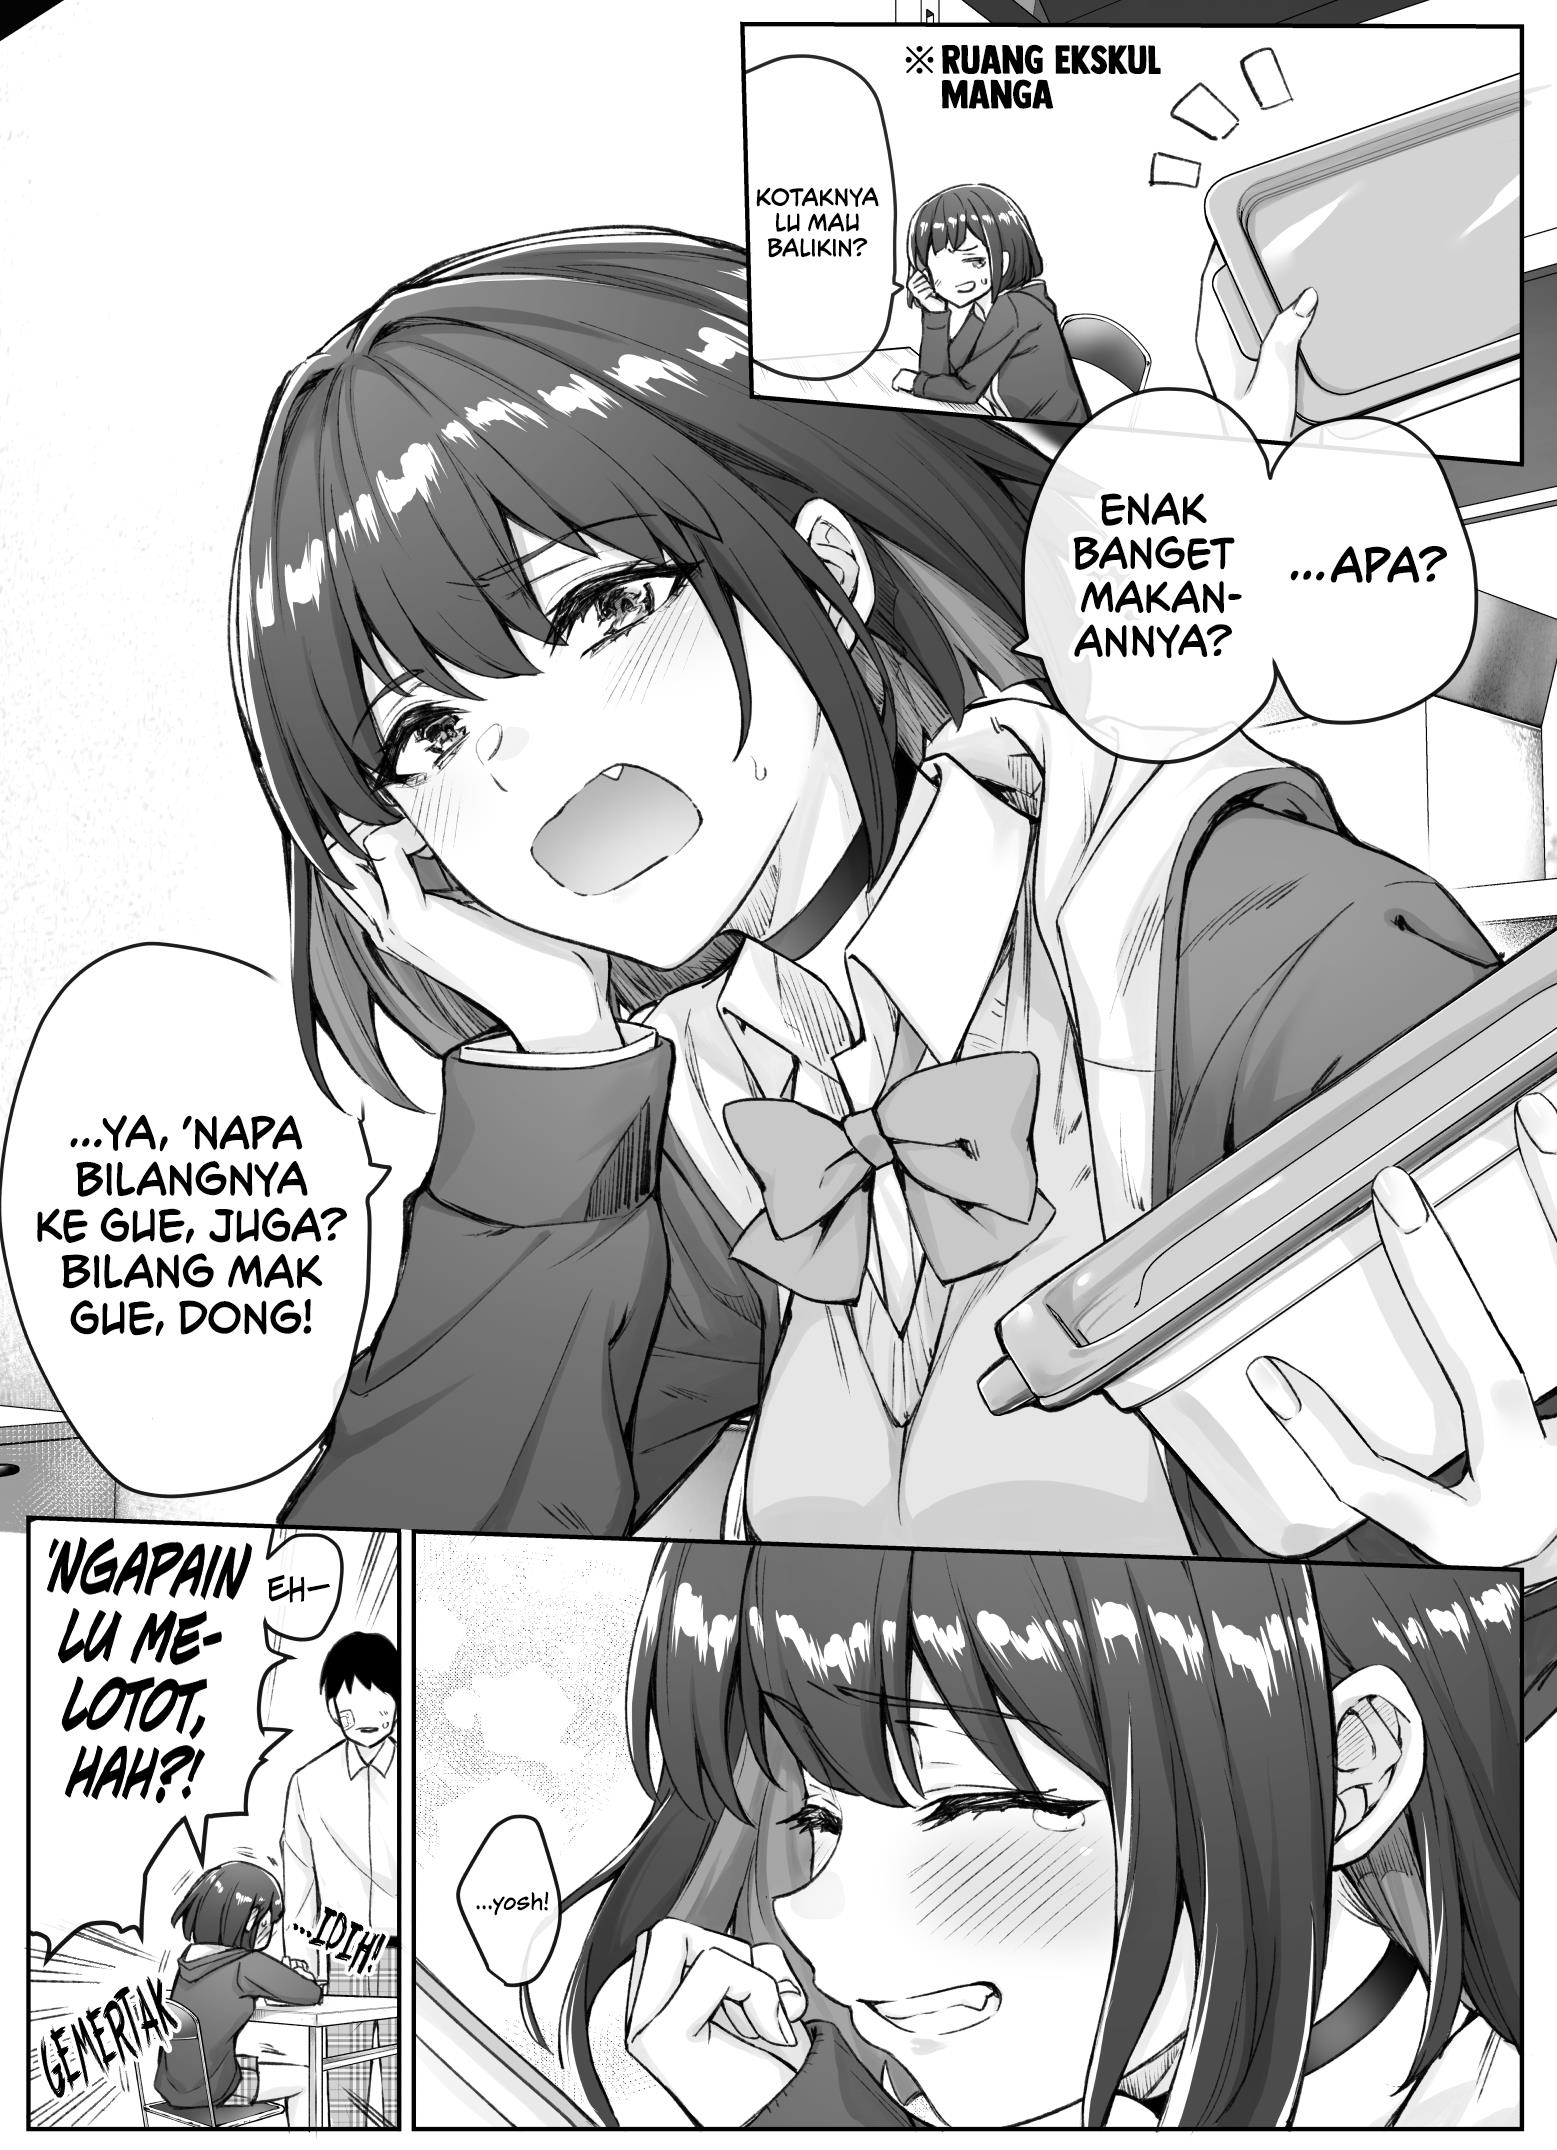 The Tsuntsuntsuntsuntsuntsun tsuntsuntsuntsuntsundere Girl Getting Less and Less Tsun Day by Day Chapter 19.2